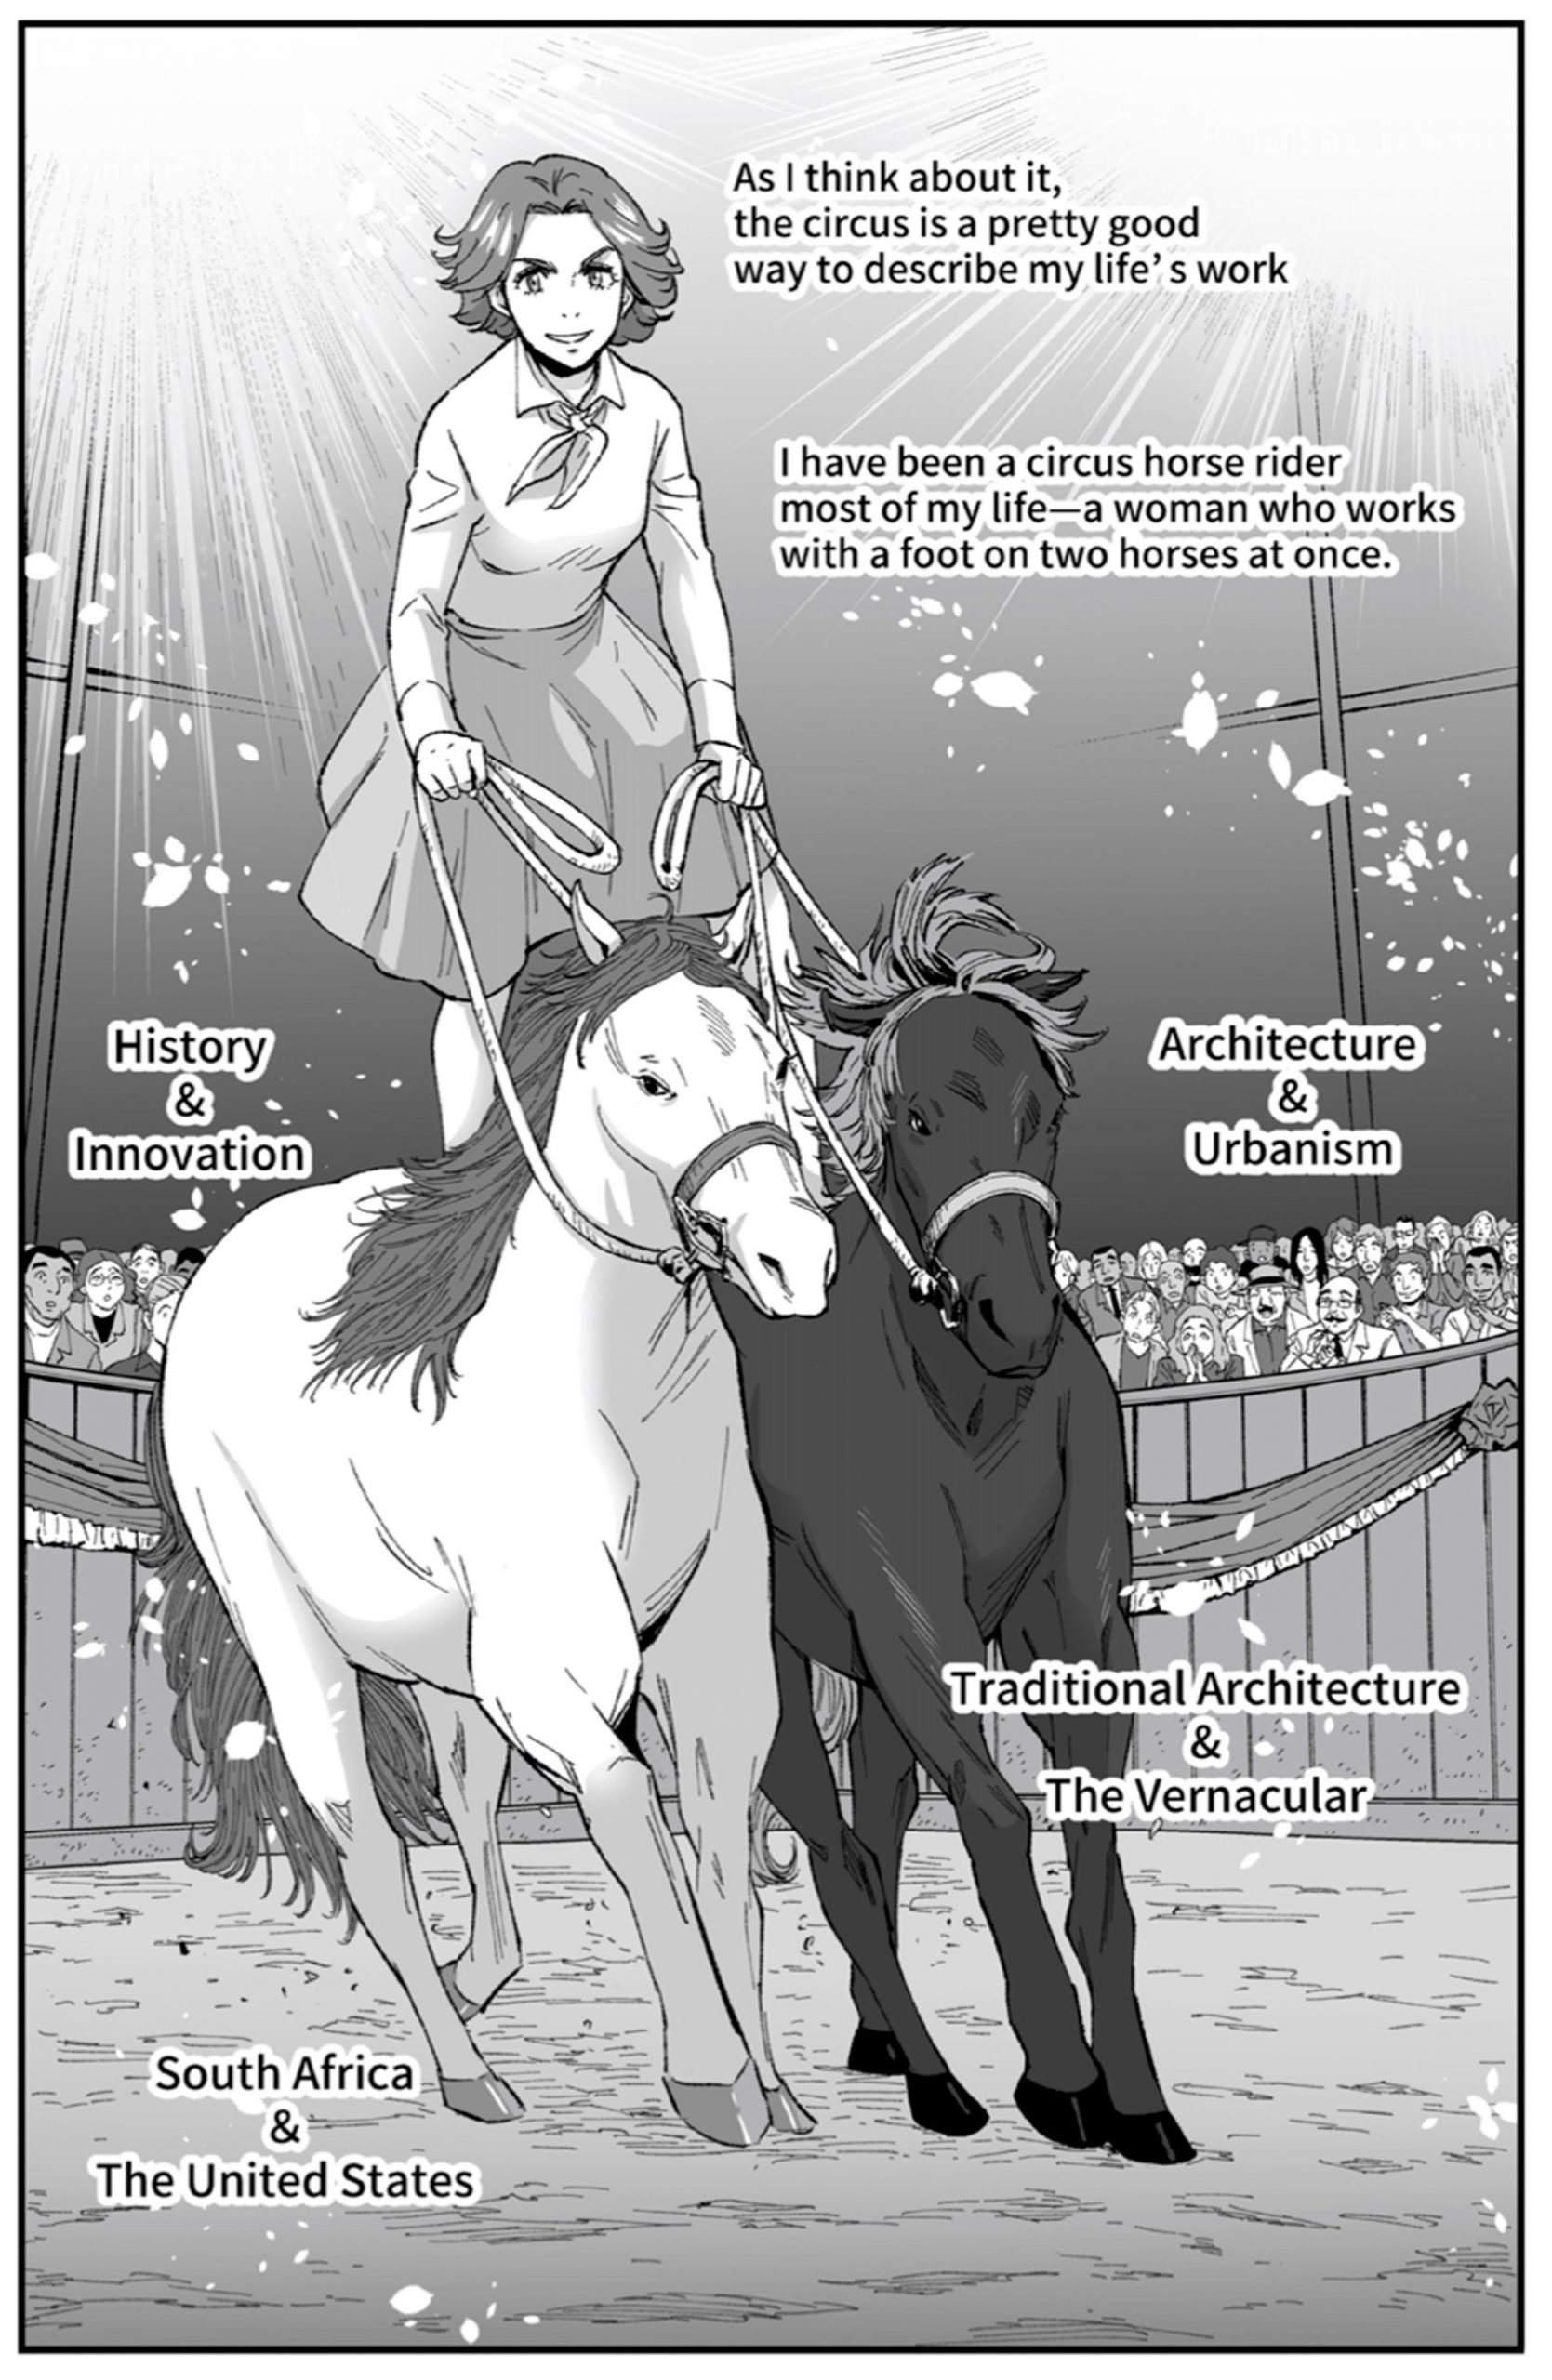 Manga showing Denise Scott Brown as a circus rider on two horses